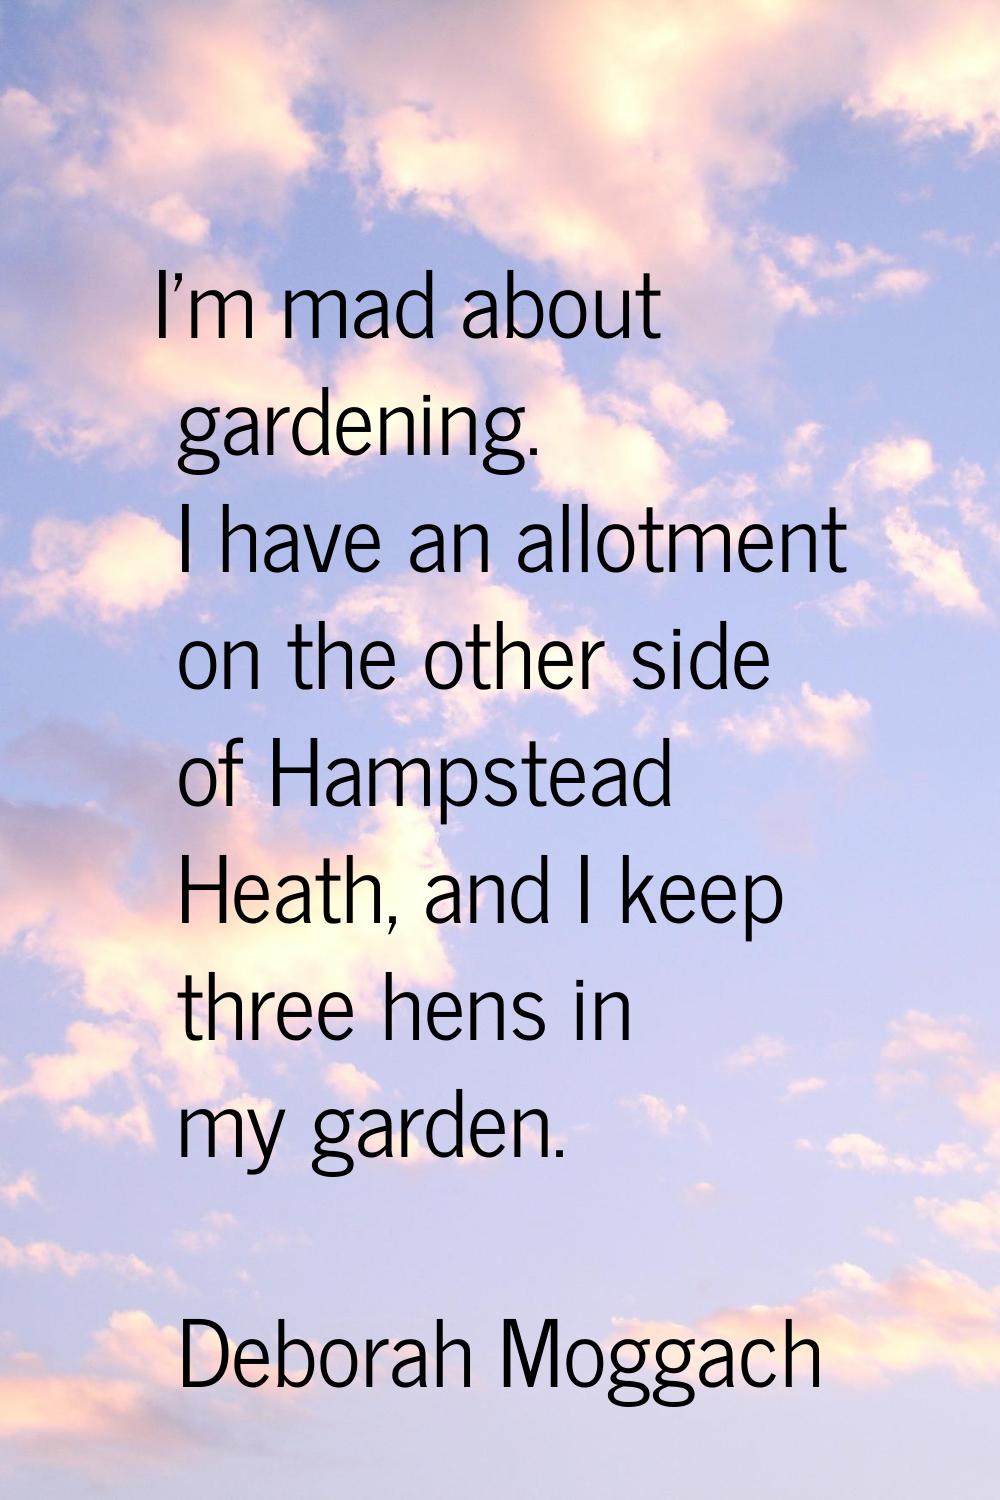 I'm mad about gardening. I have an allotment on the other side of Hampstead Heath, and I keep three